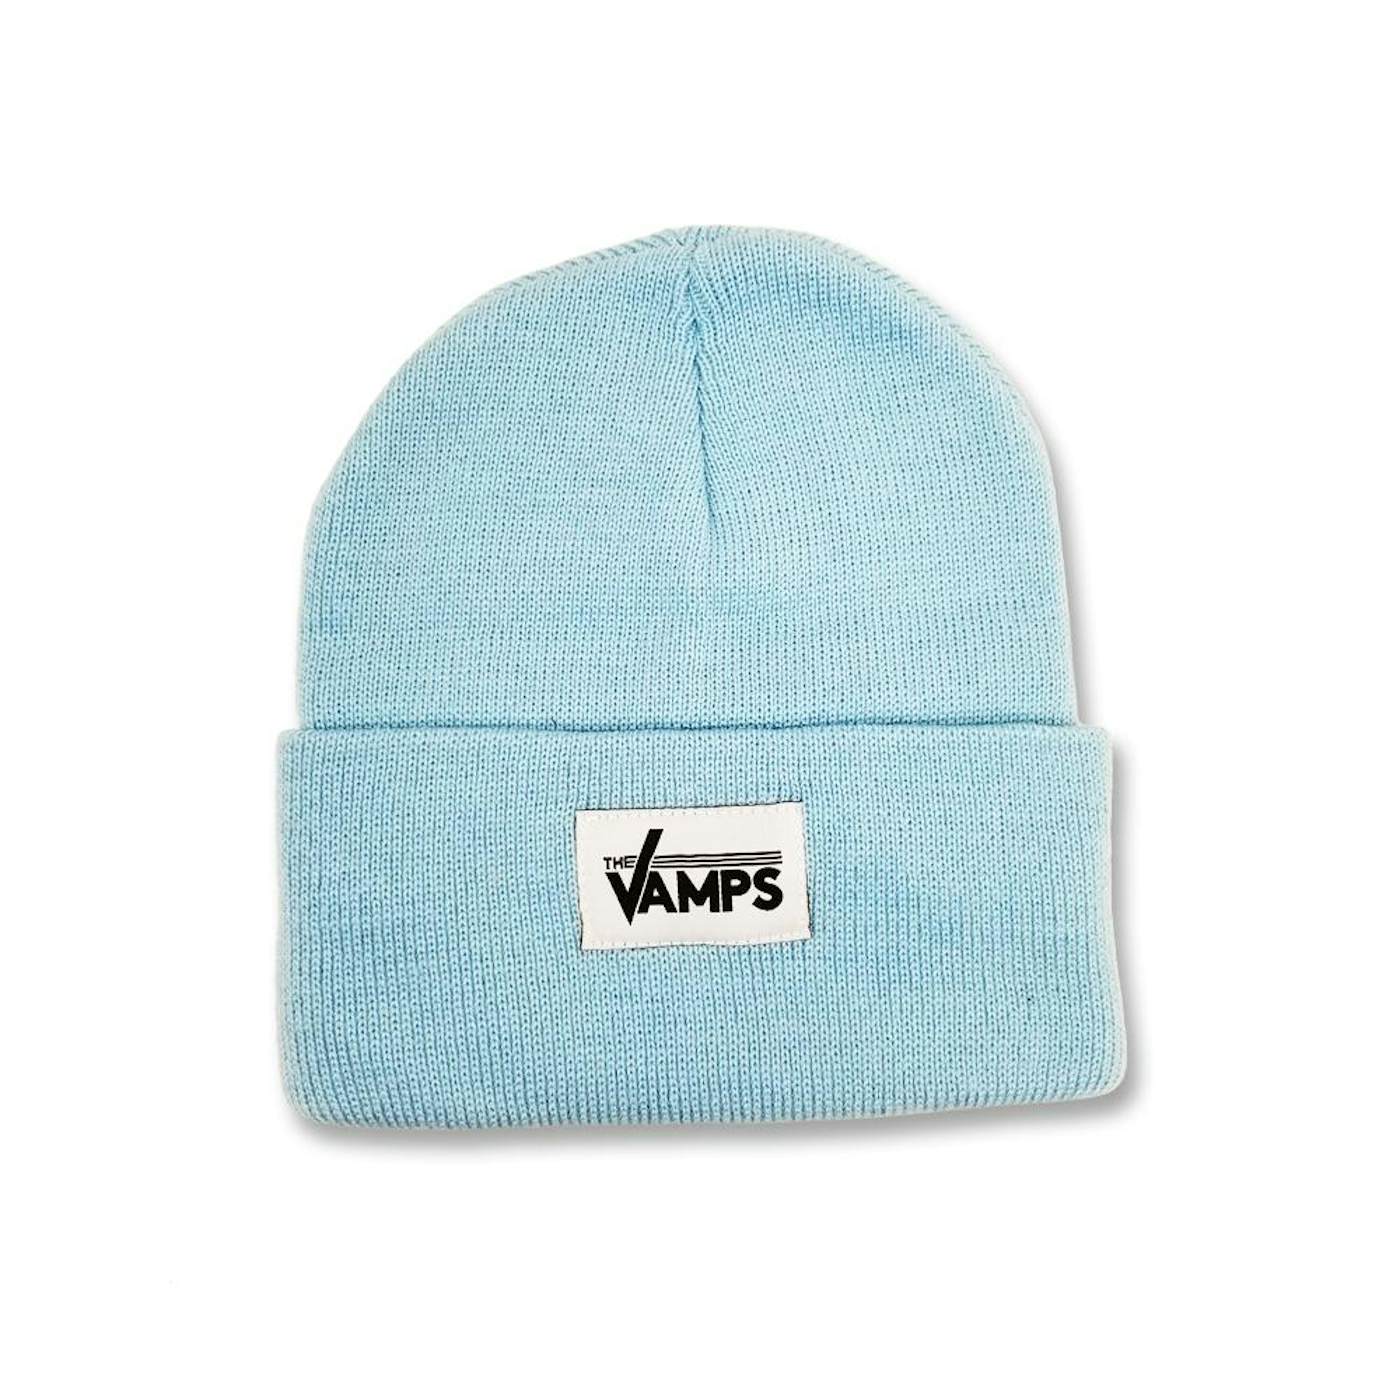 The Vamps Baby Blue Woven Label Beanie